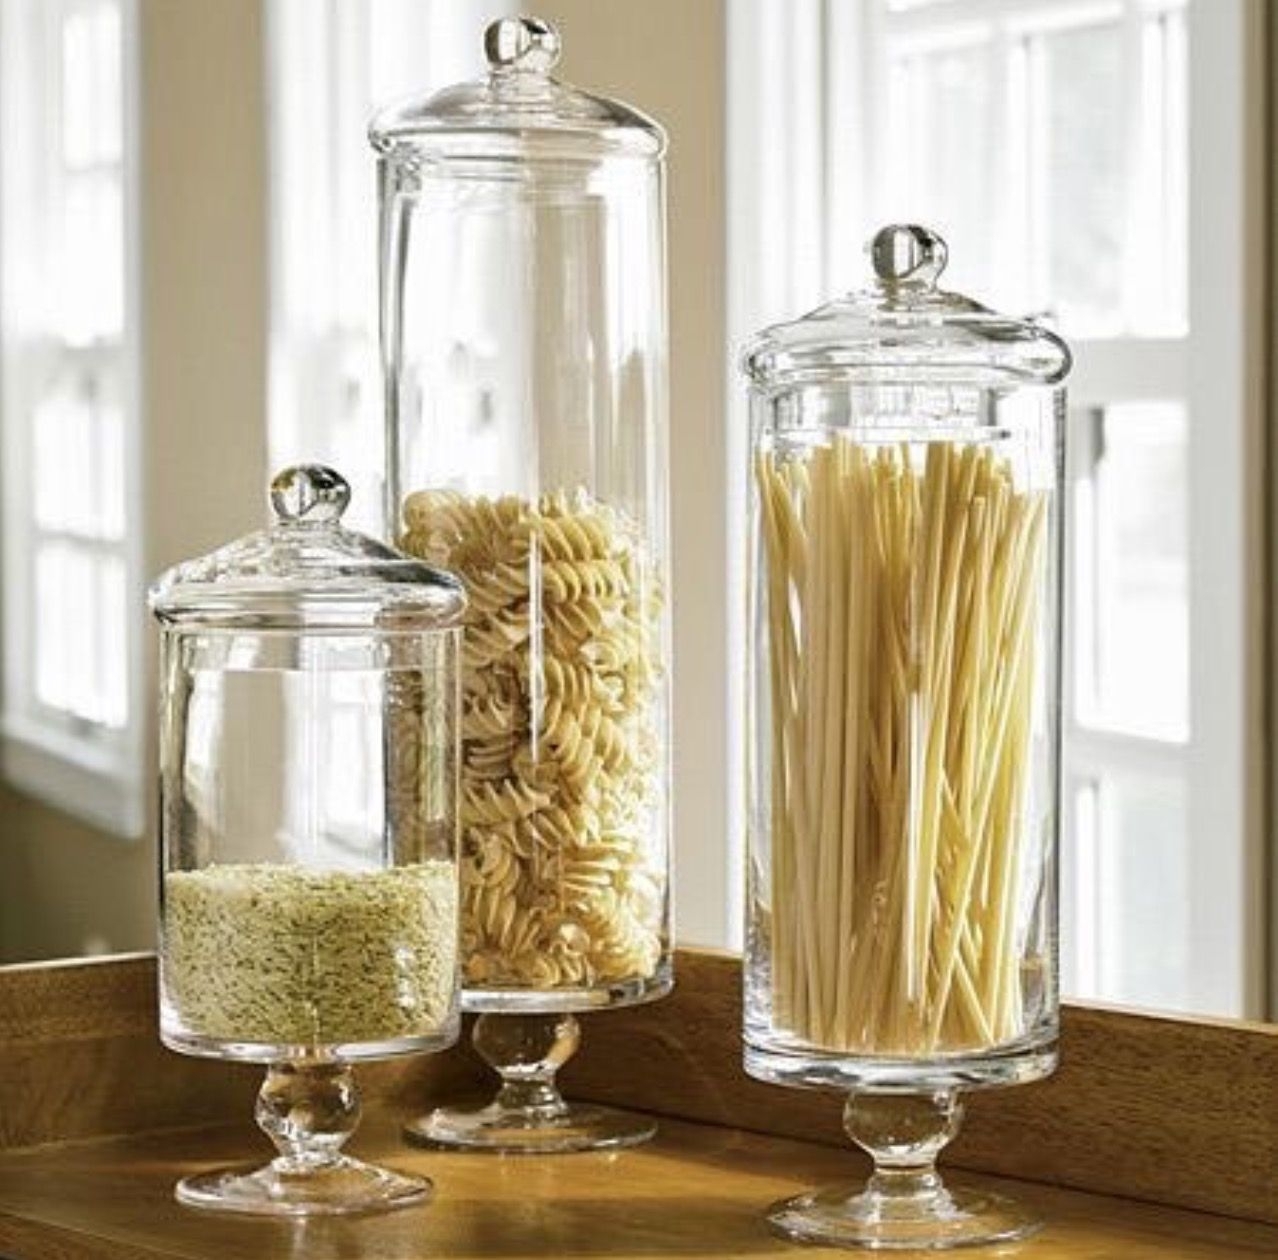 Set of 5 Glass Kitchen Canisters with Airtight Stainless-Steel Lid -  Dishwasher Safe, Storage Jars for Kitchen, Bathroom & Pantry Organization,  Ideal